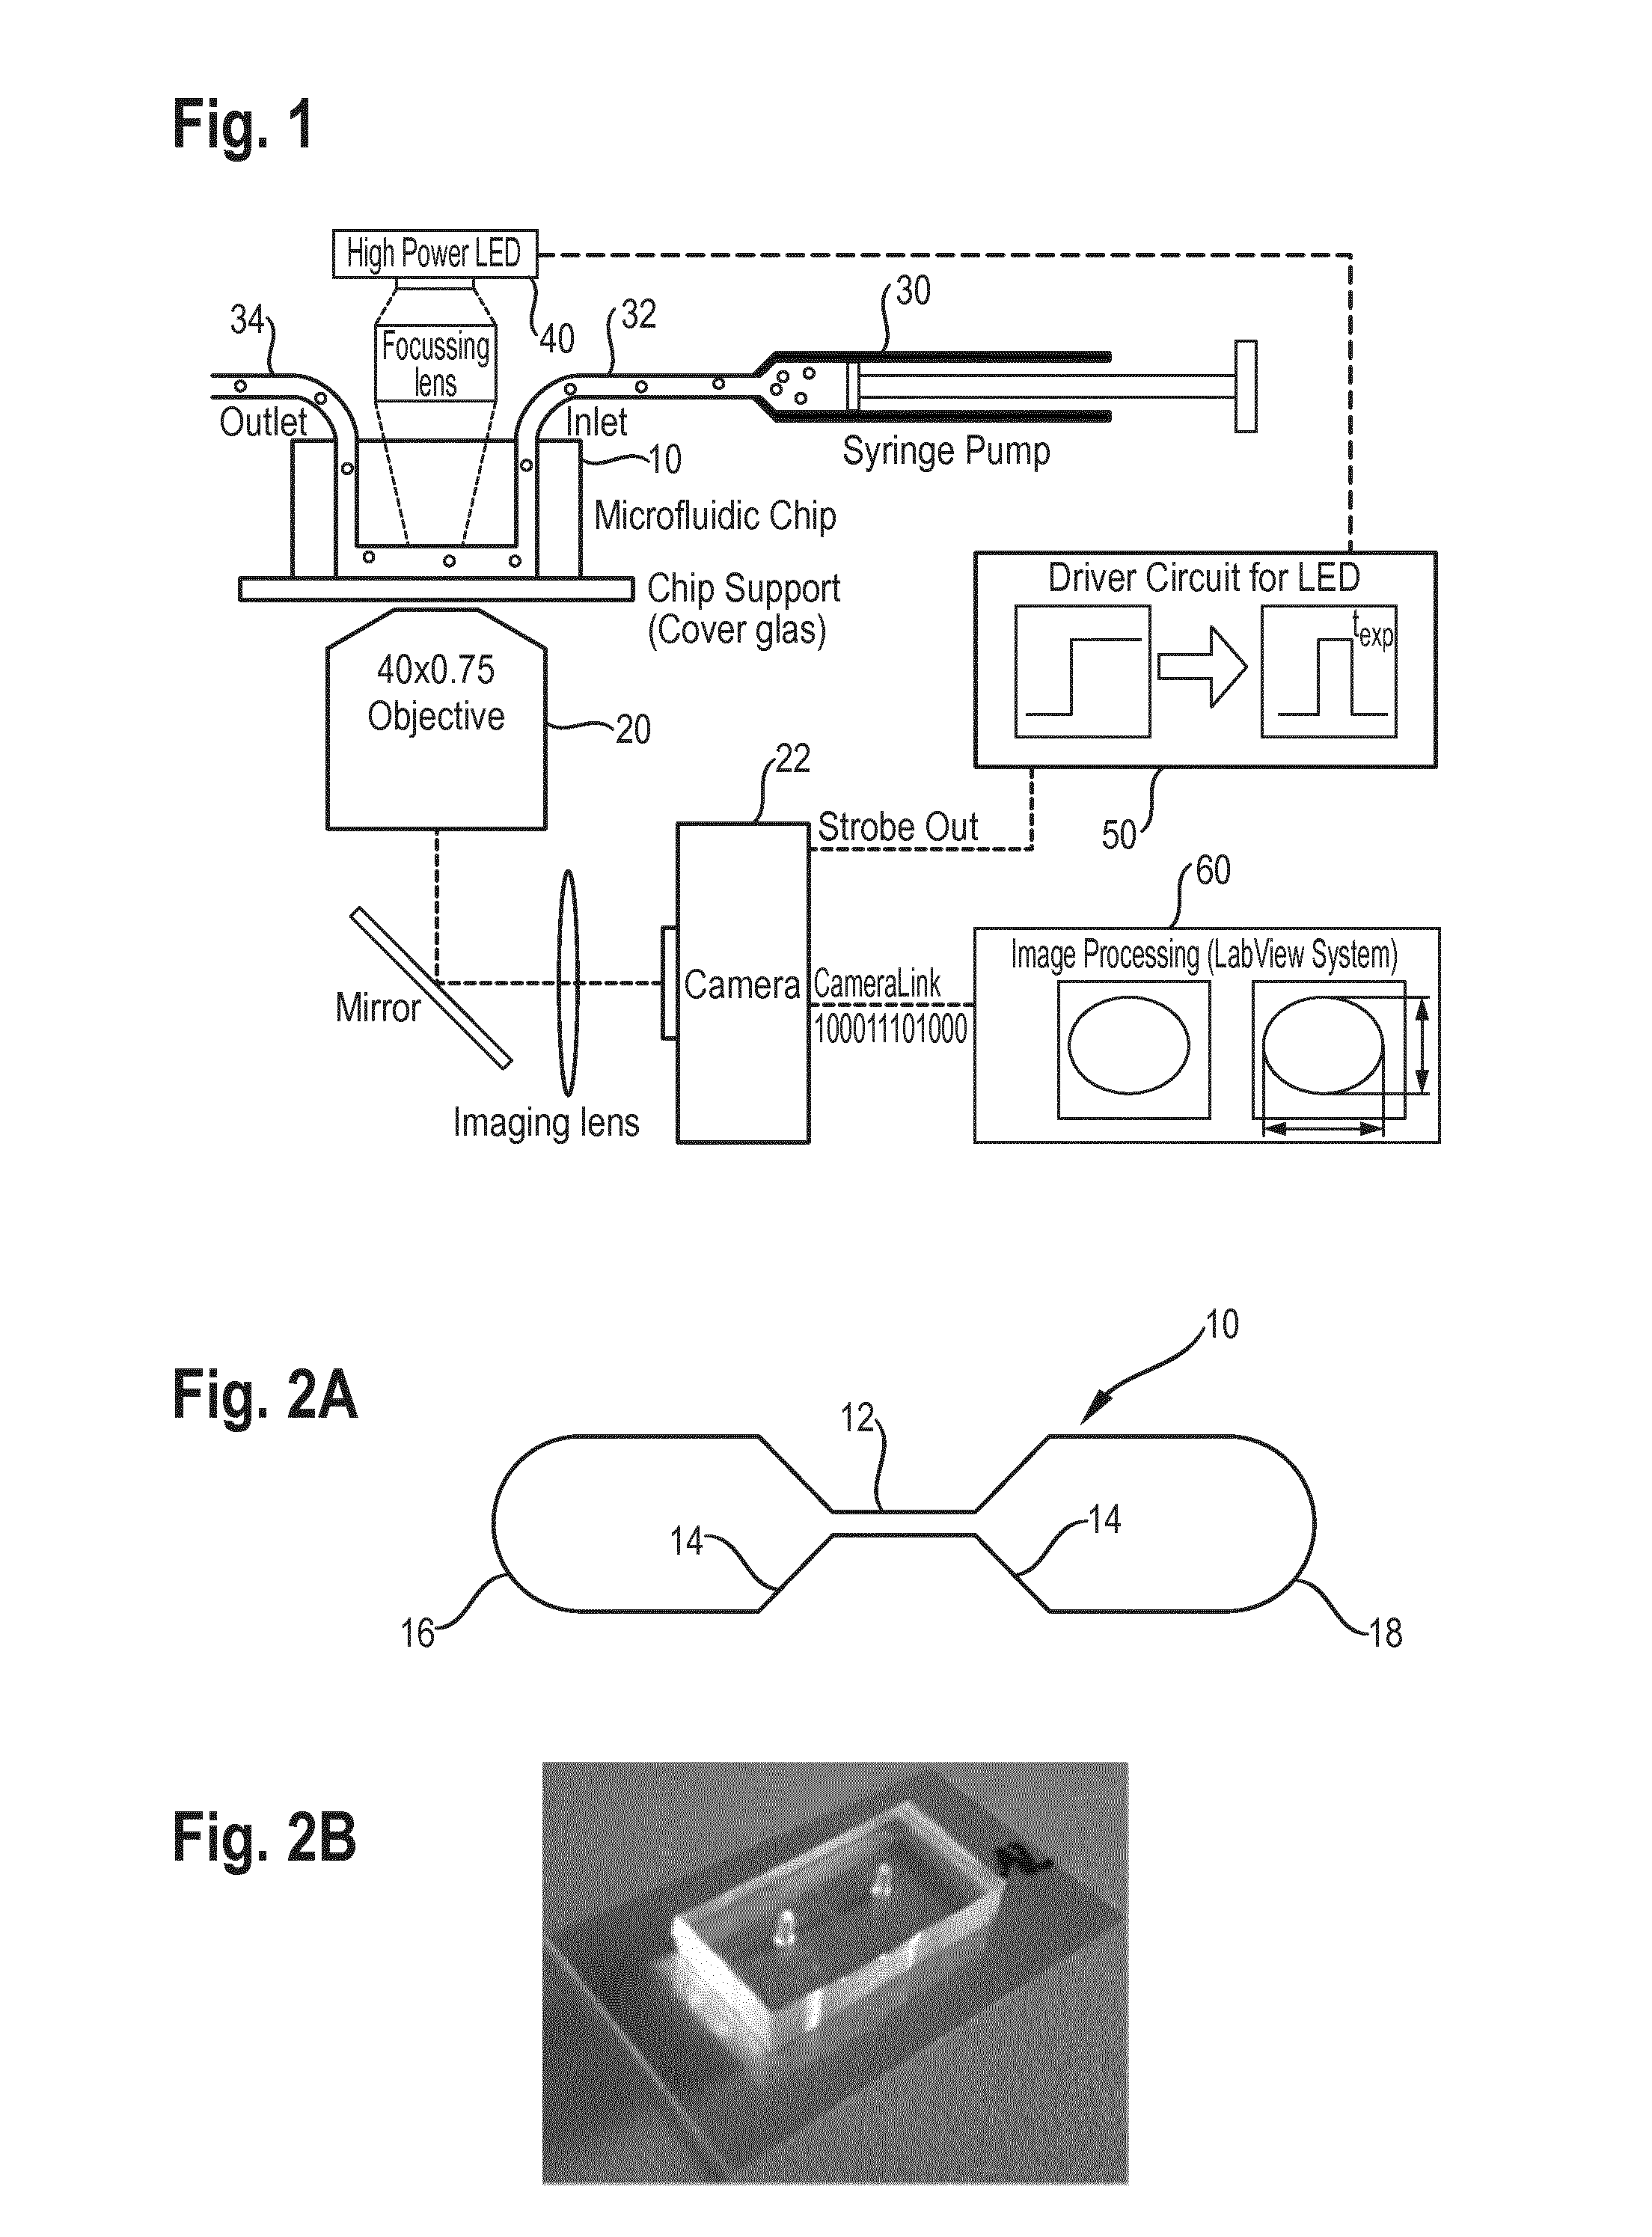 Apparatus and method for determining the mechanical properties of cells